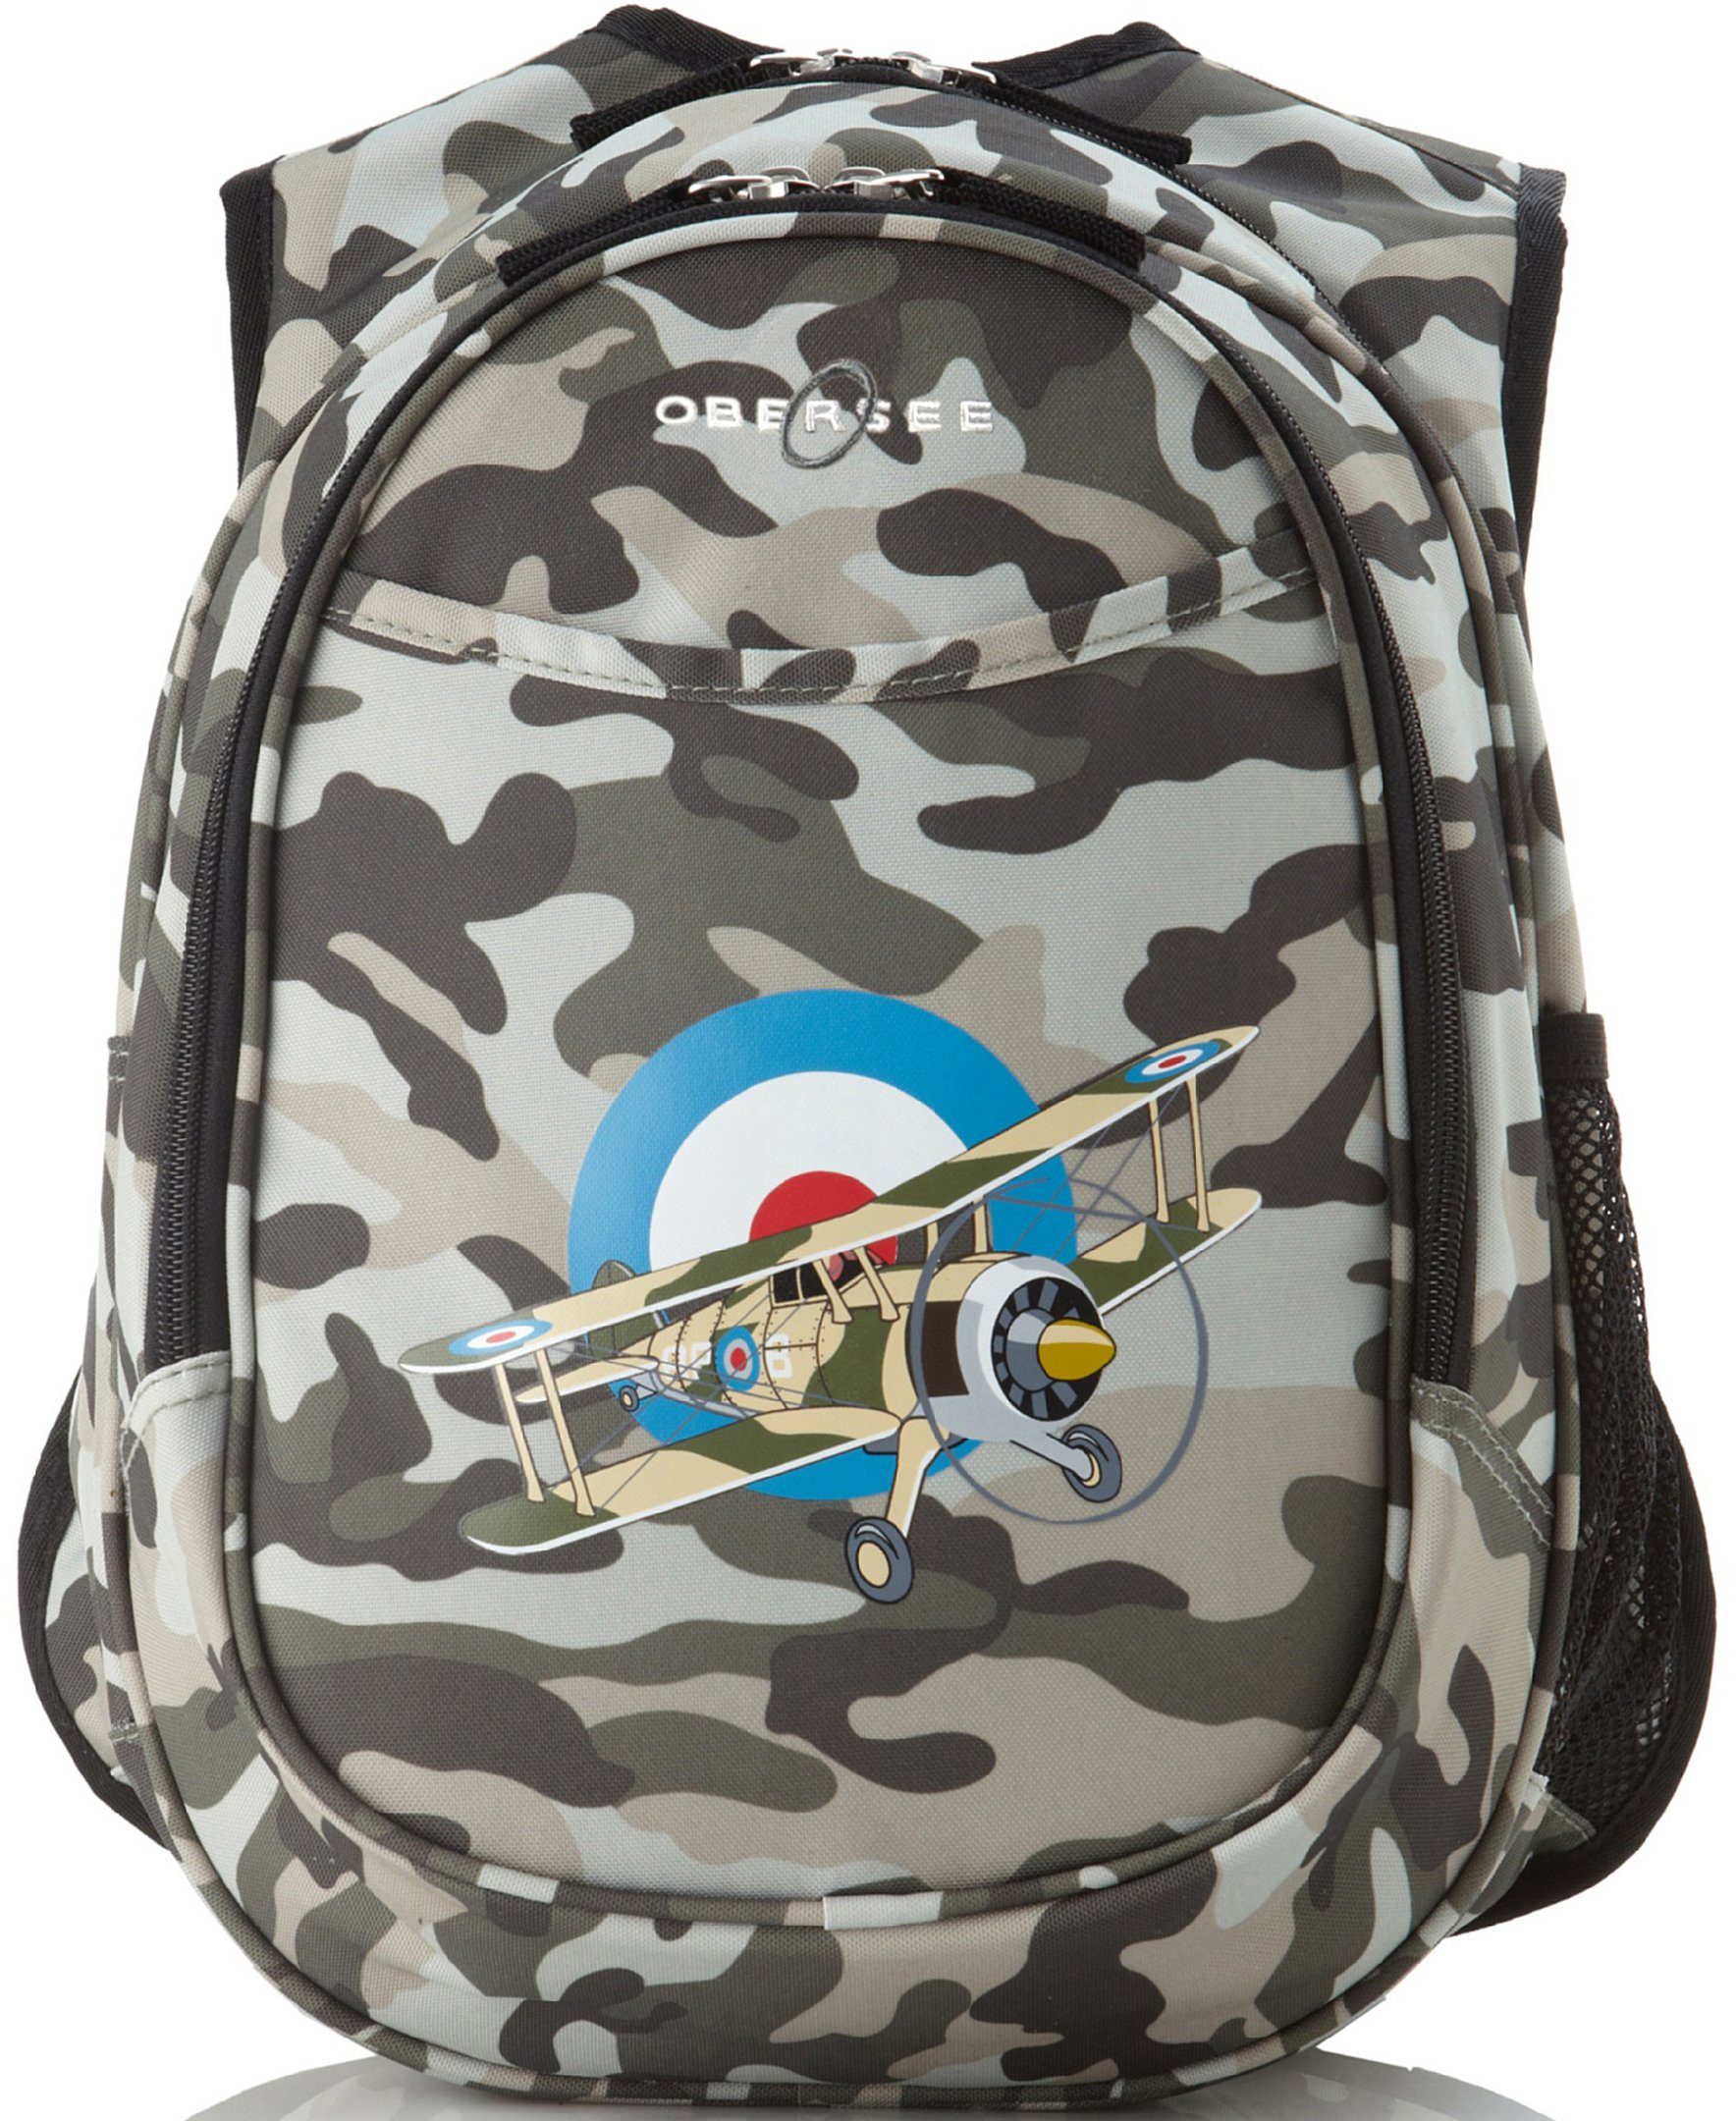 O3KCBP006 Obersee Mini Preschool All-in-One Backpack for Toddlers and Kids with integrated Insulated Cooler | Camo Camouflage Airplane - image 1 of 6